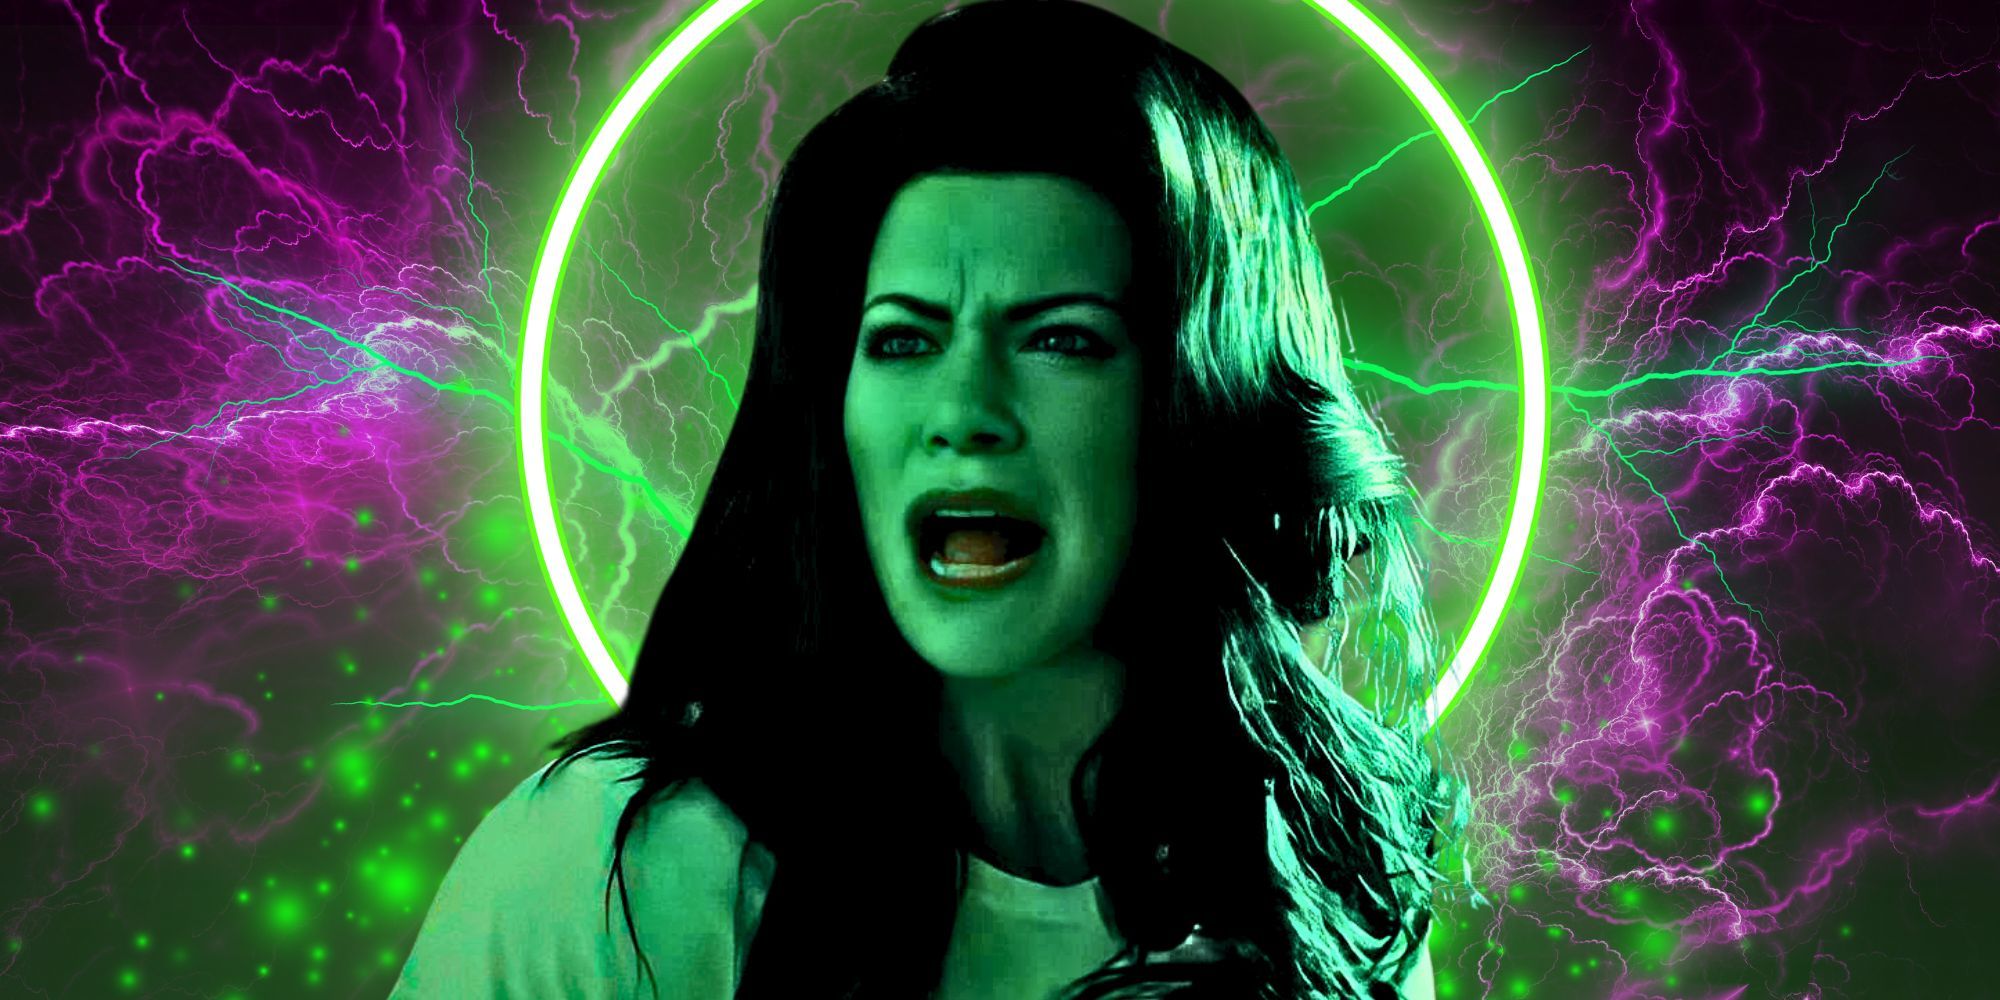 Jennifer Walters' She-Hulk screaming in front of purple and green background